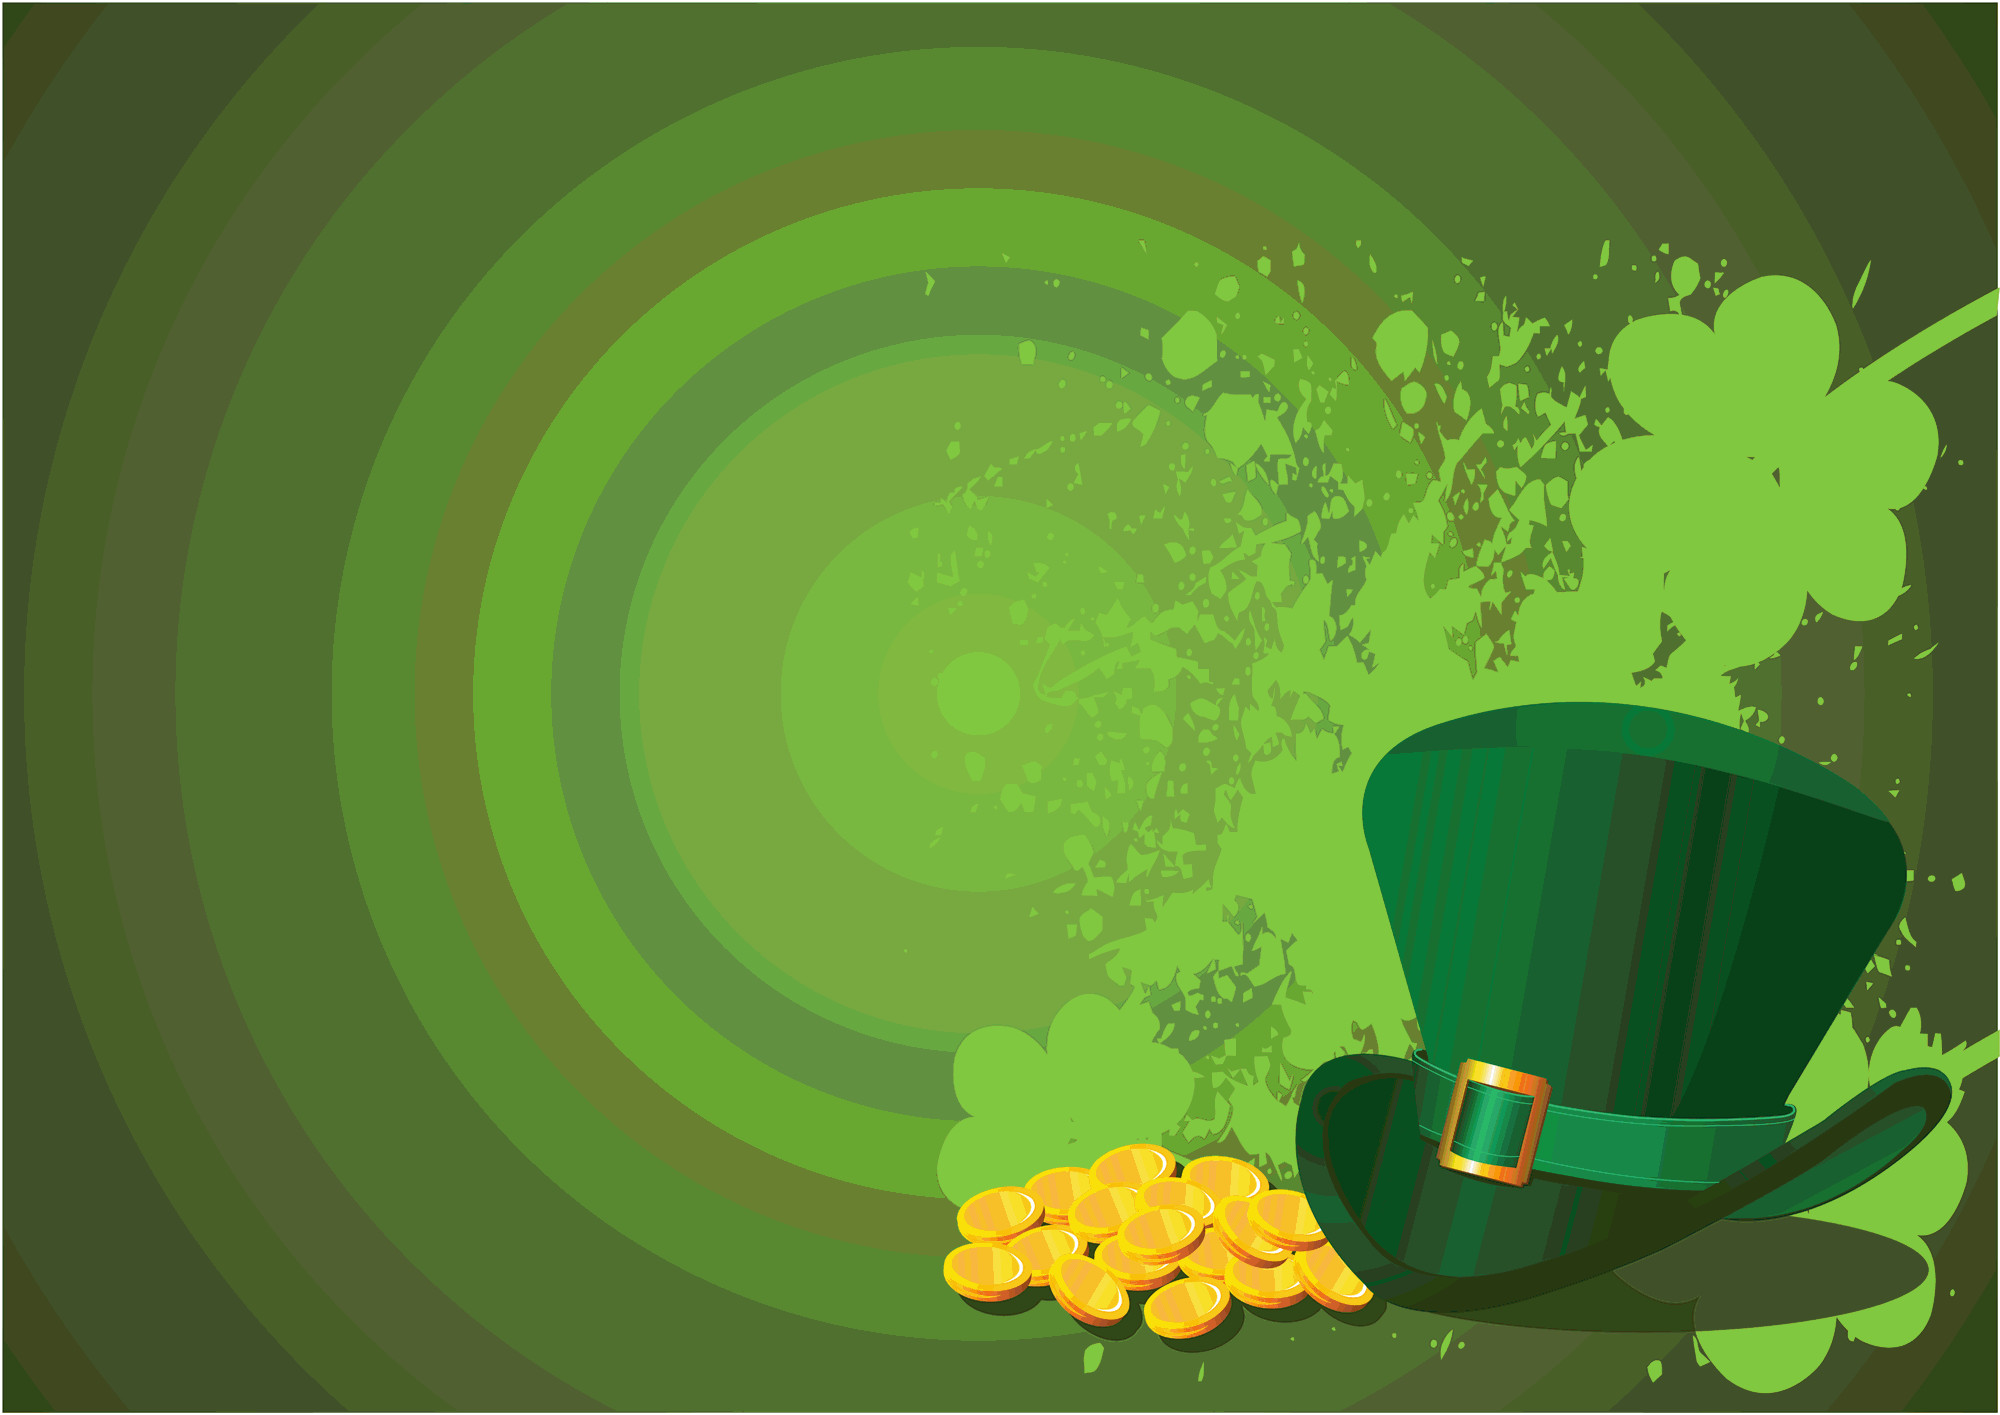 2000x1415 St Patrick's Day Background | Cool Images